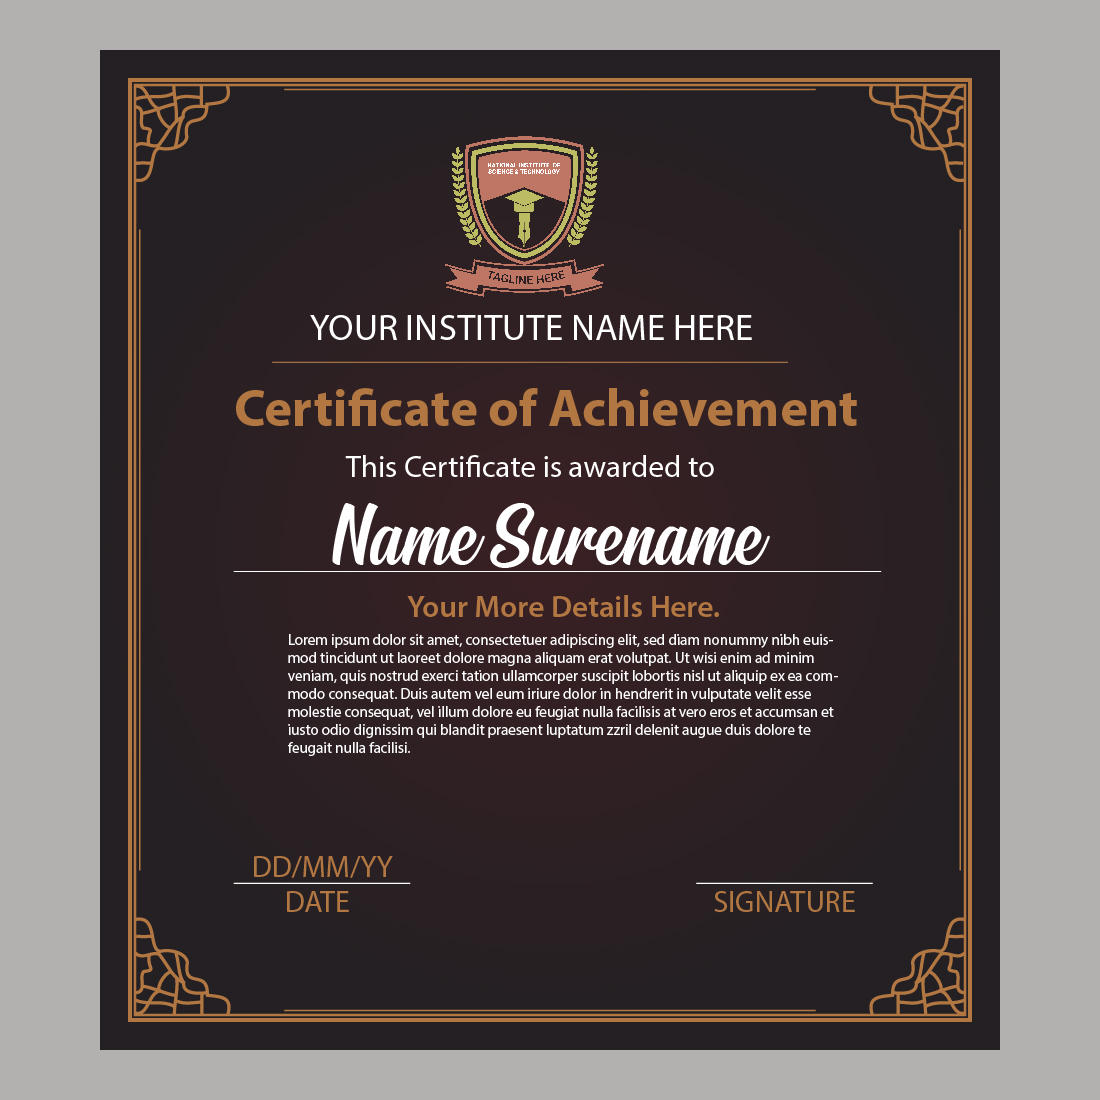 School, academy or any educational institute certificate template design cover image.